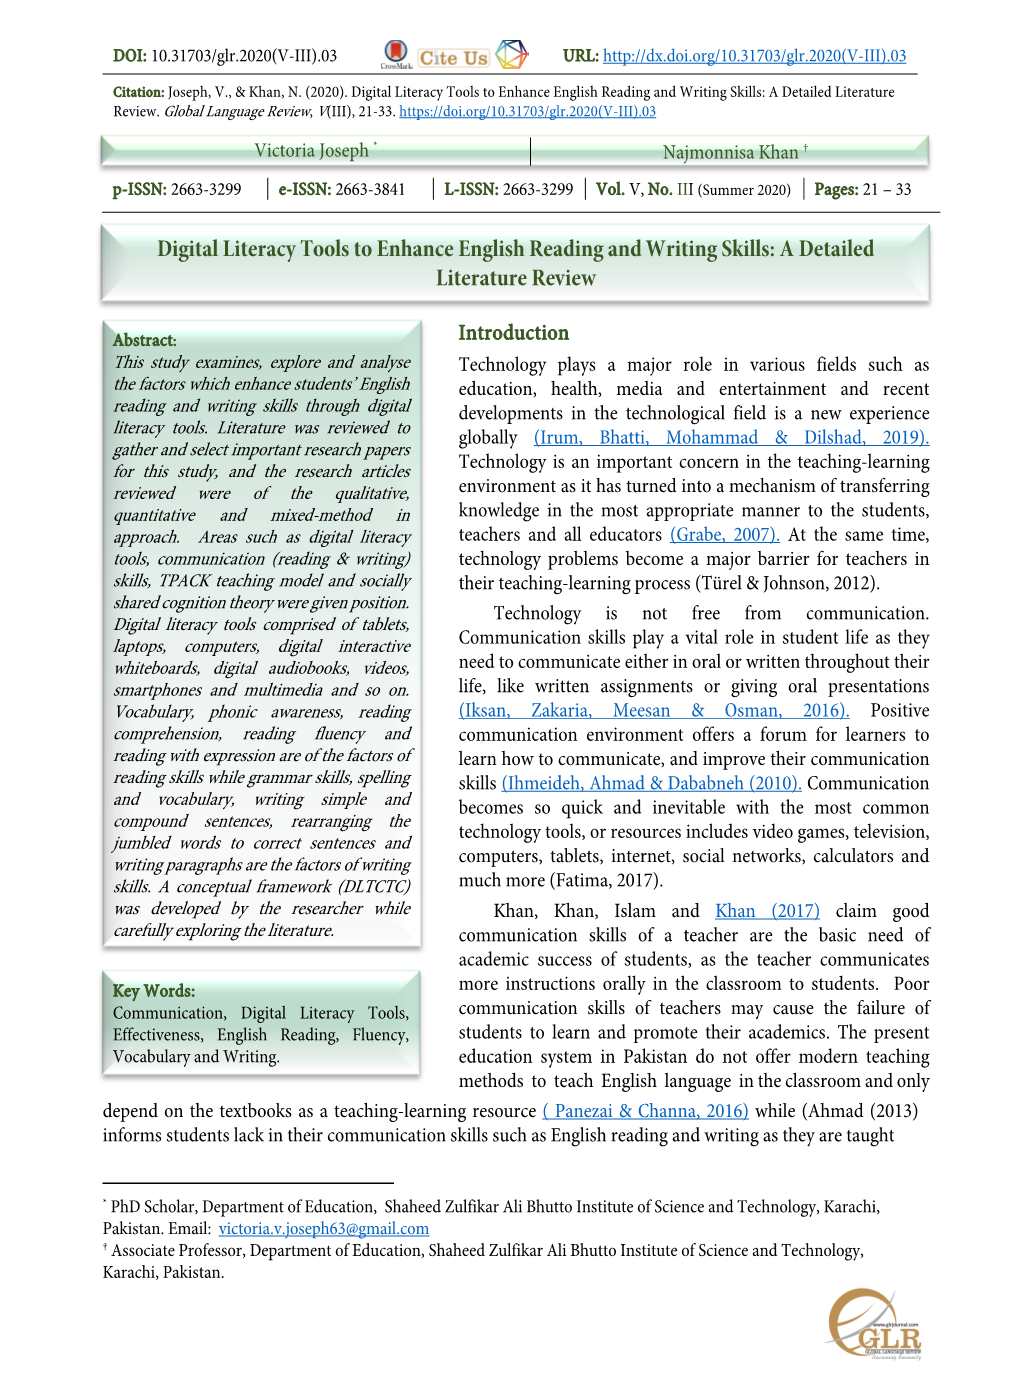 Digital Literacy Tools to Enhance English Reading and Writing Skills: a Detailed Literature Review